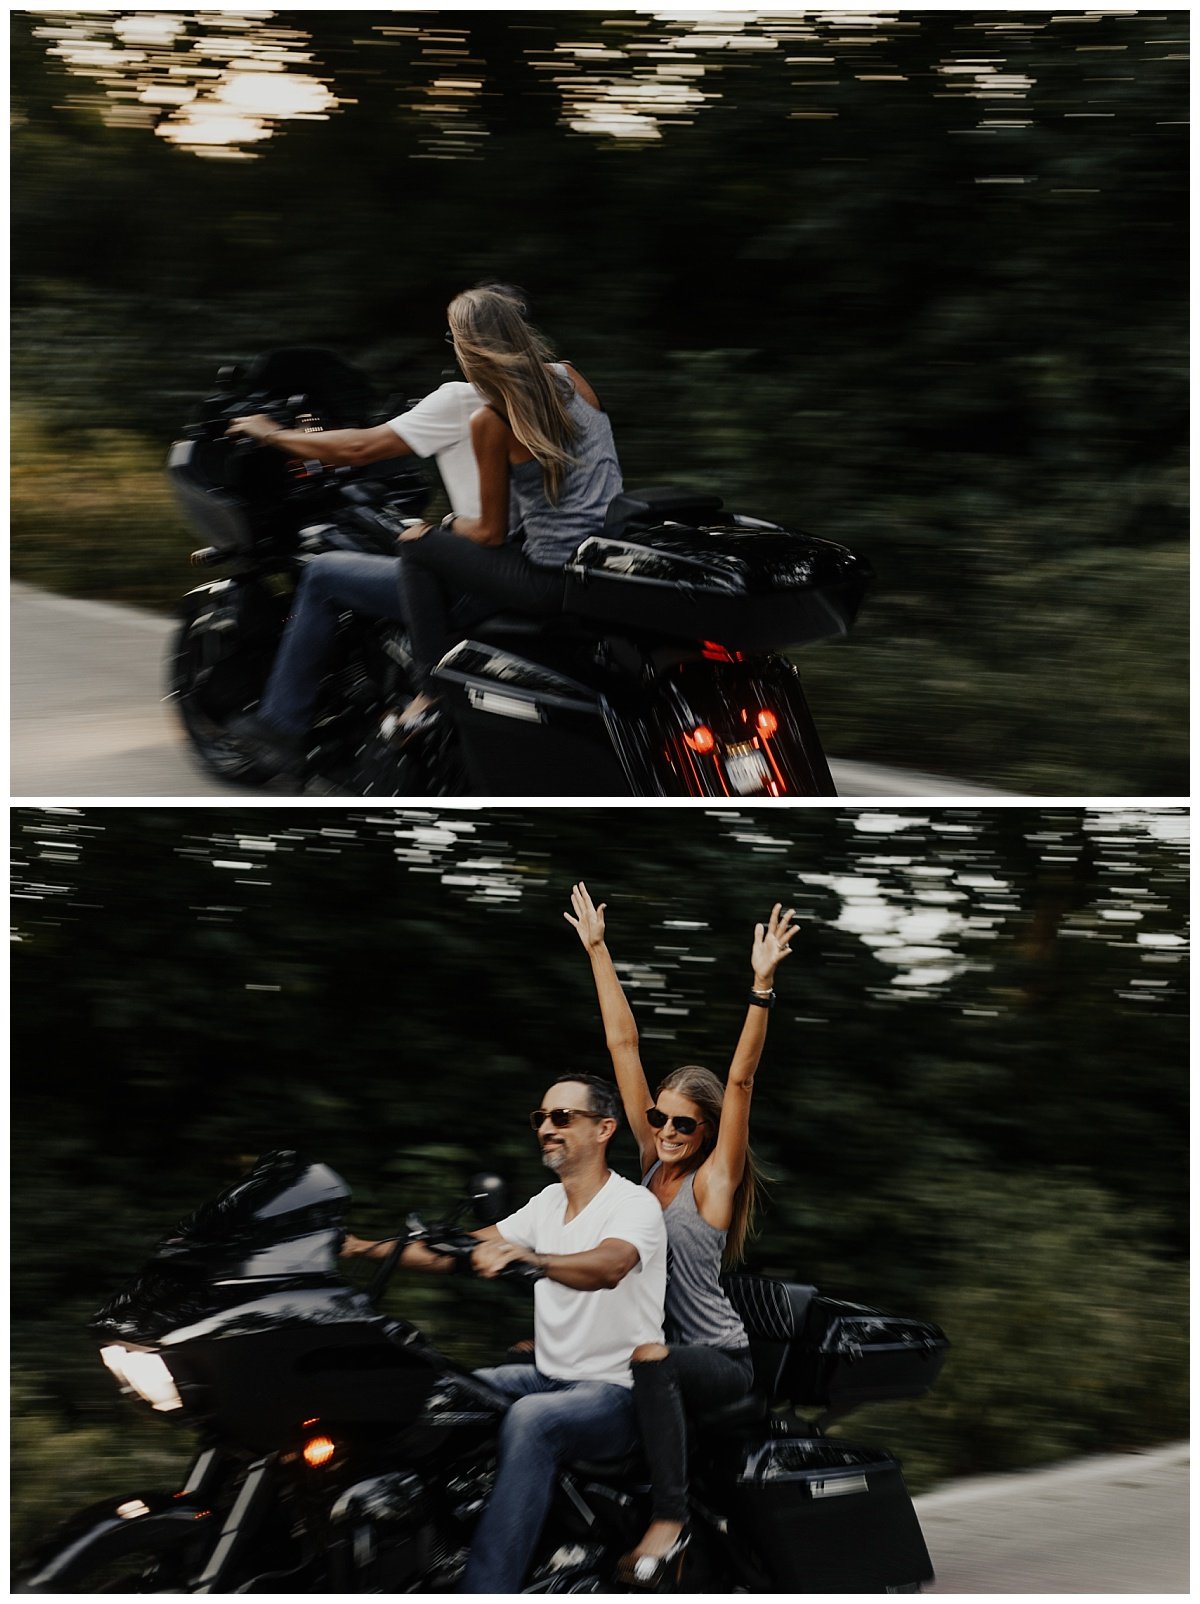 motorcycle+session+_+adventure+session+_+engagement+session+_+motorcycle+photos+_+lana+del+rey+_+ride+or+die+_+adventurous+couple+_+kansas+city+photographer+_+kansas+city+photography (11).jpeg